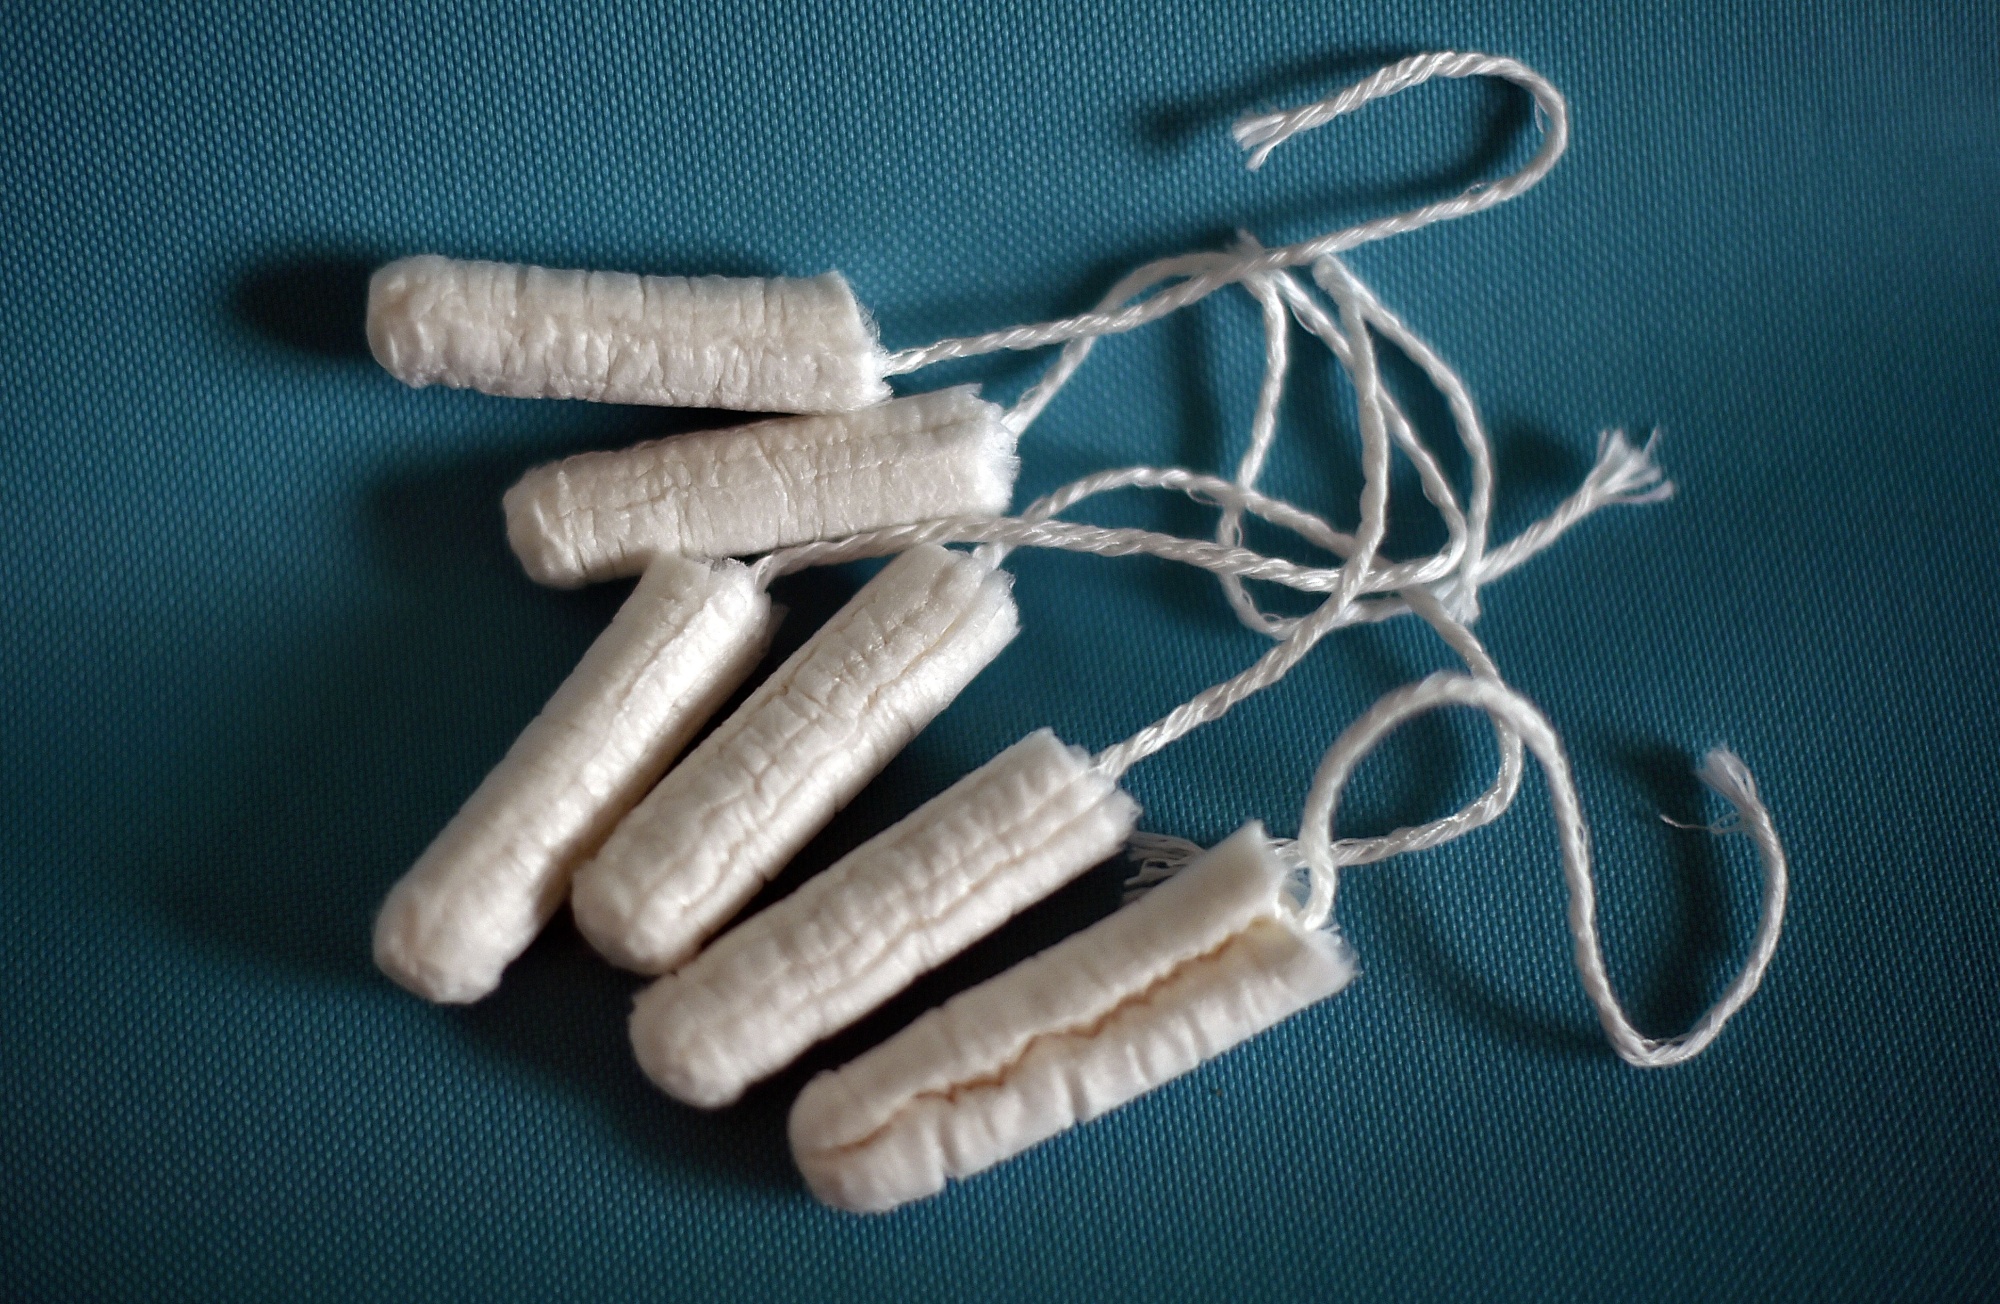 Tampon wars: the battle to overthrow the Tampax empire